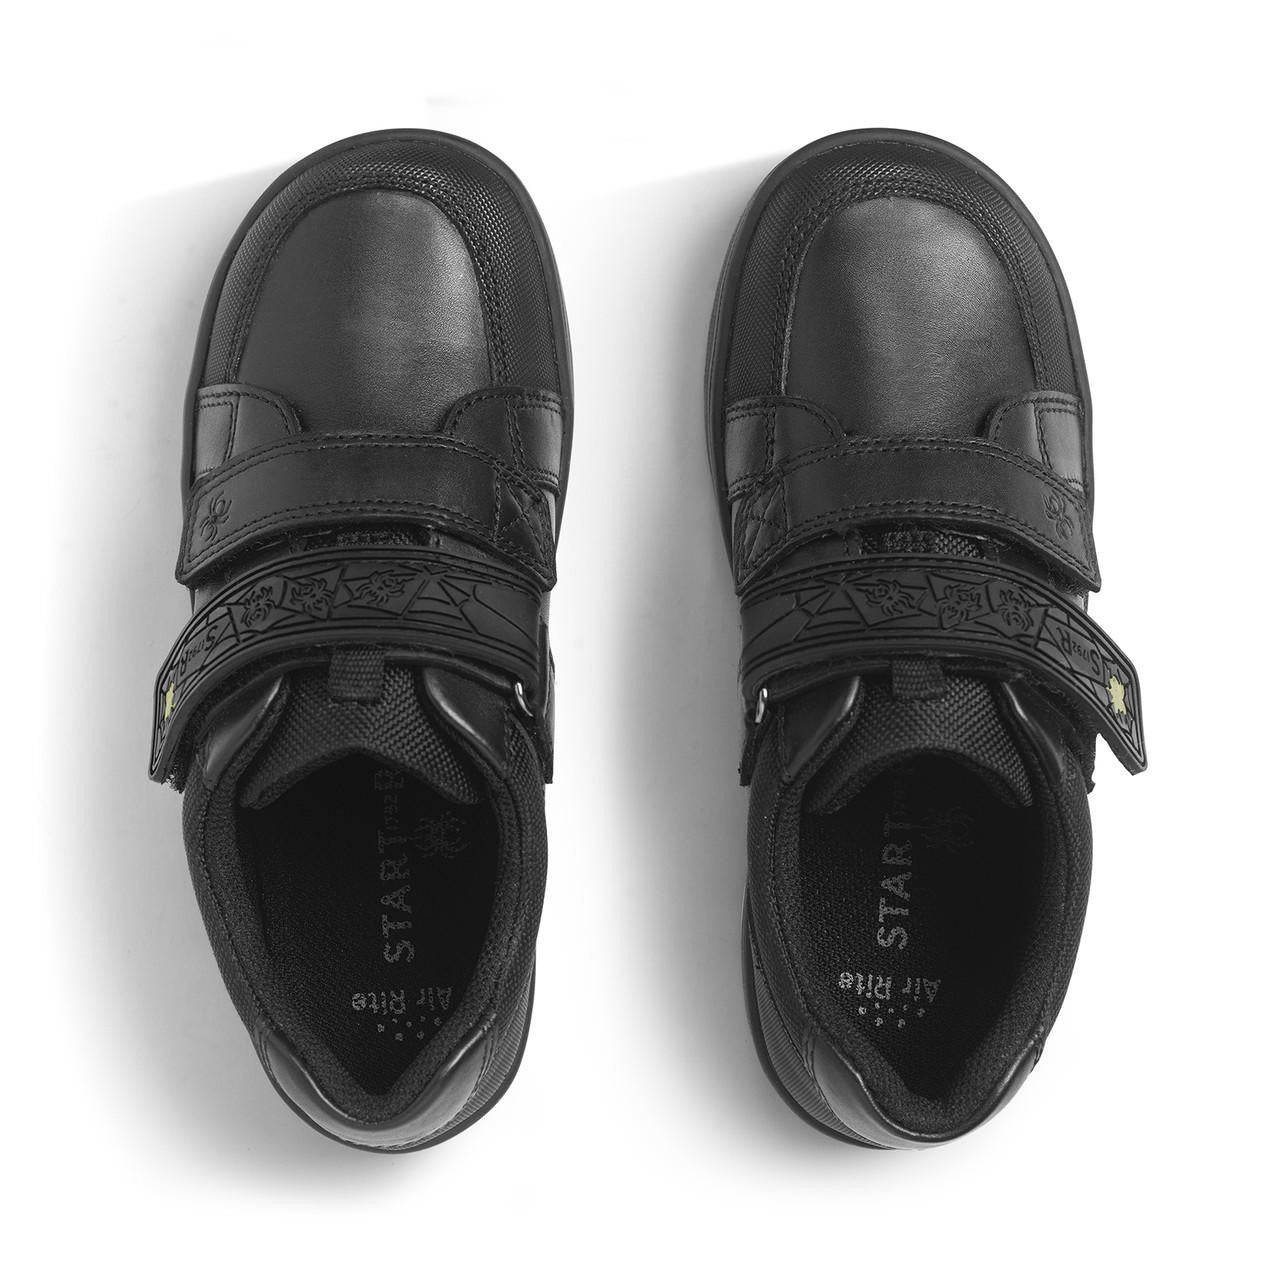 A pair of boys school shoes by Start-Rite, style Spider Web, in black leather with toe bumper and spider motif. View from above.